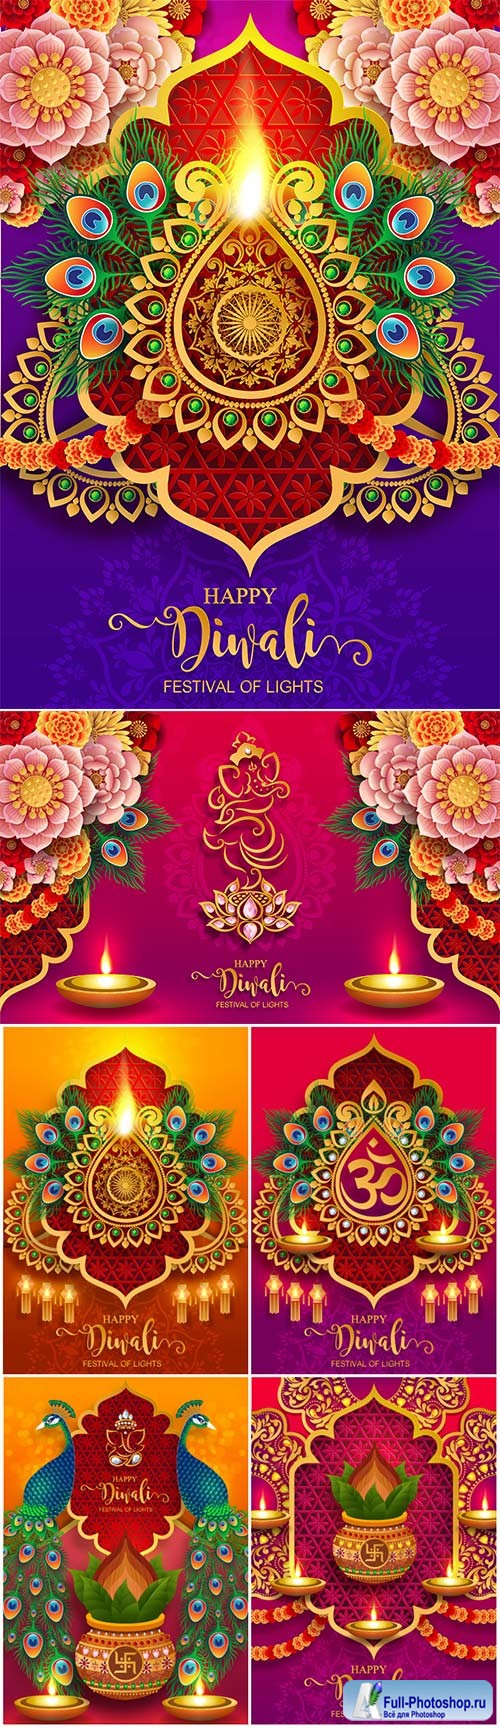 Happy Diwali festival vector card with gold diya patterned